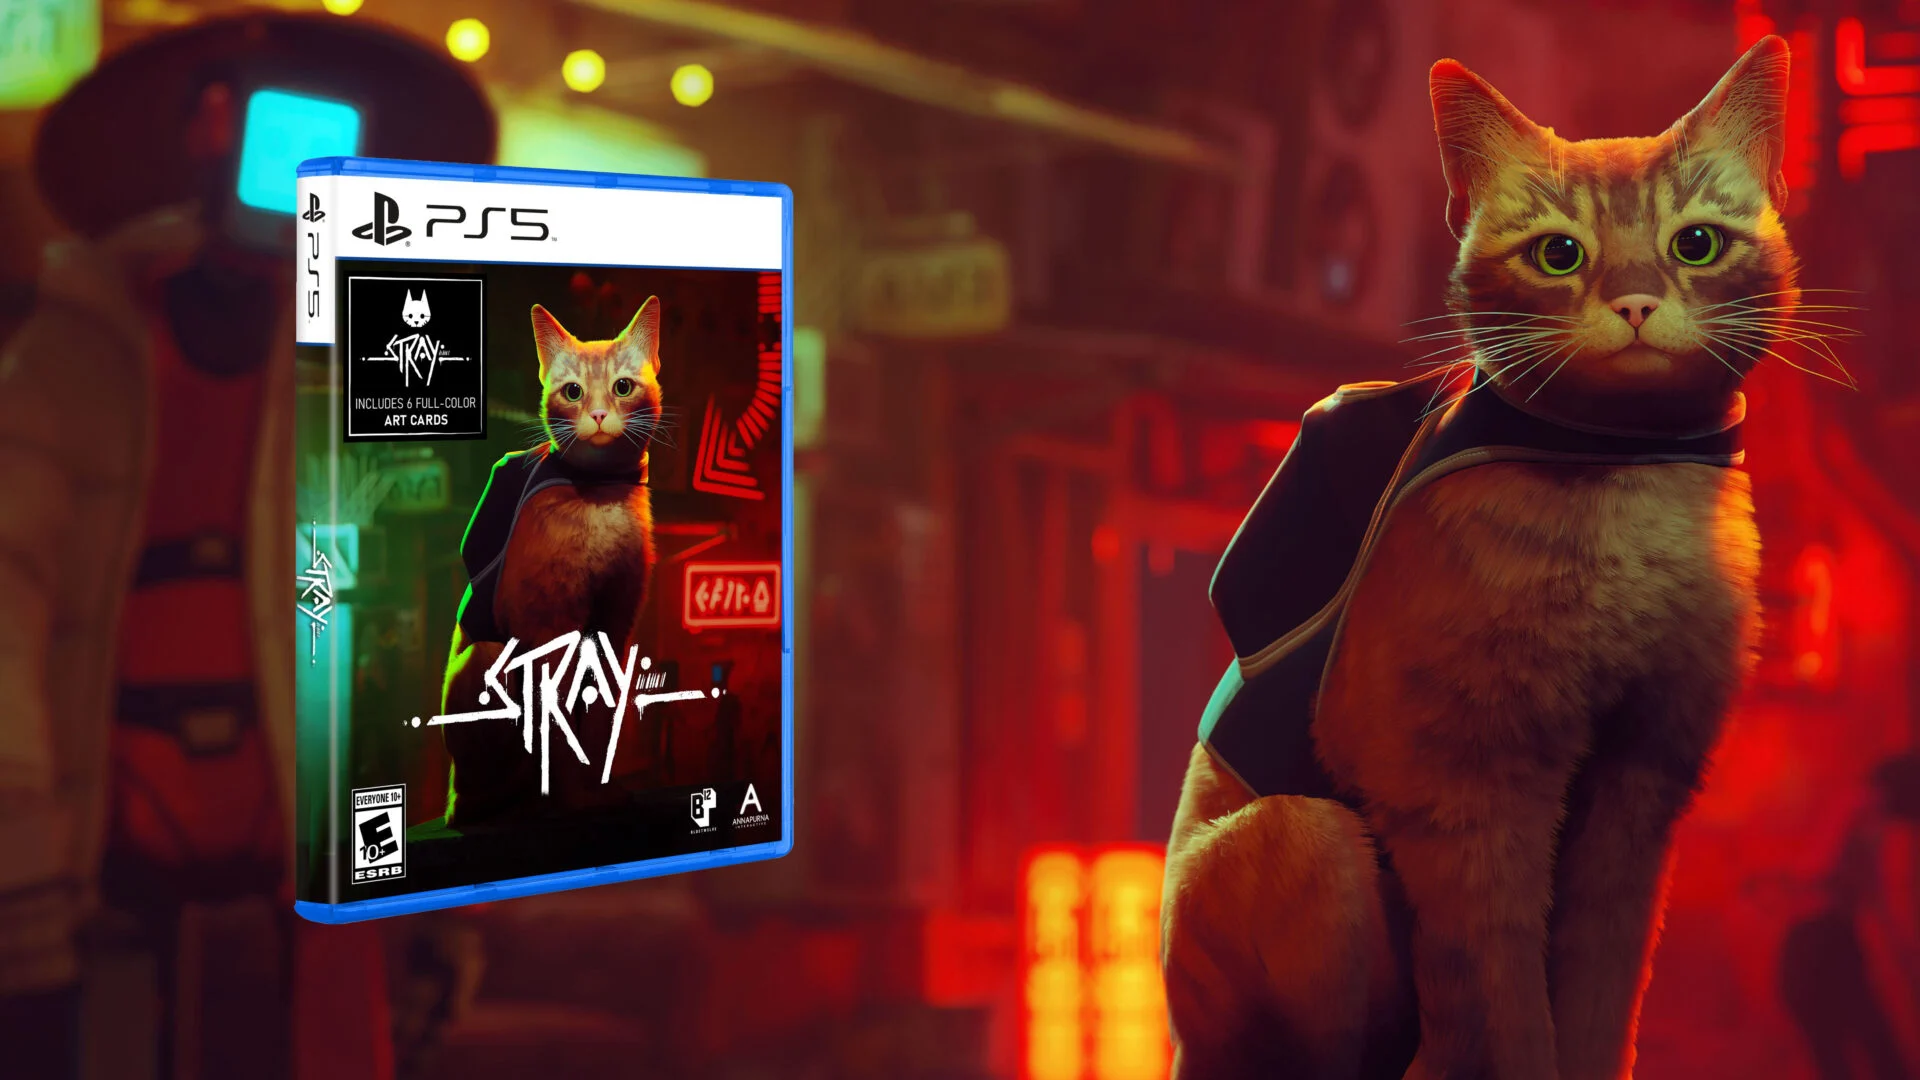 stray ps5 physical 06 08 22 1920x1080 1  Image of stray ps5 physical 06 08 22 1920x1080 1